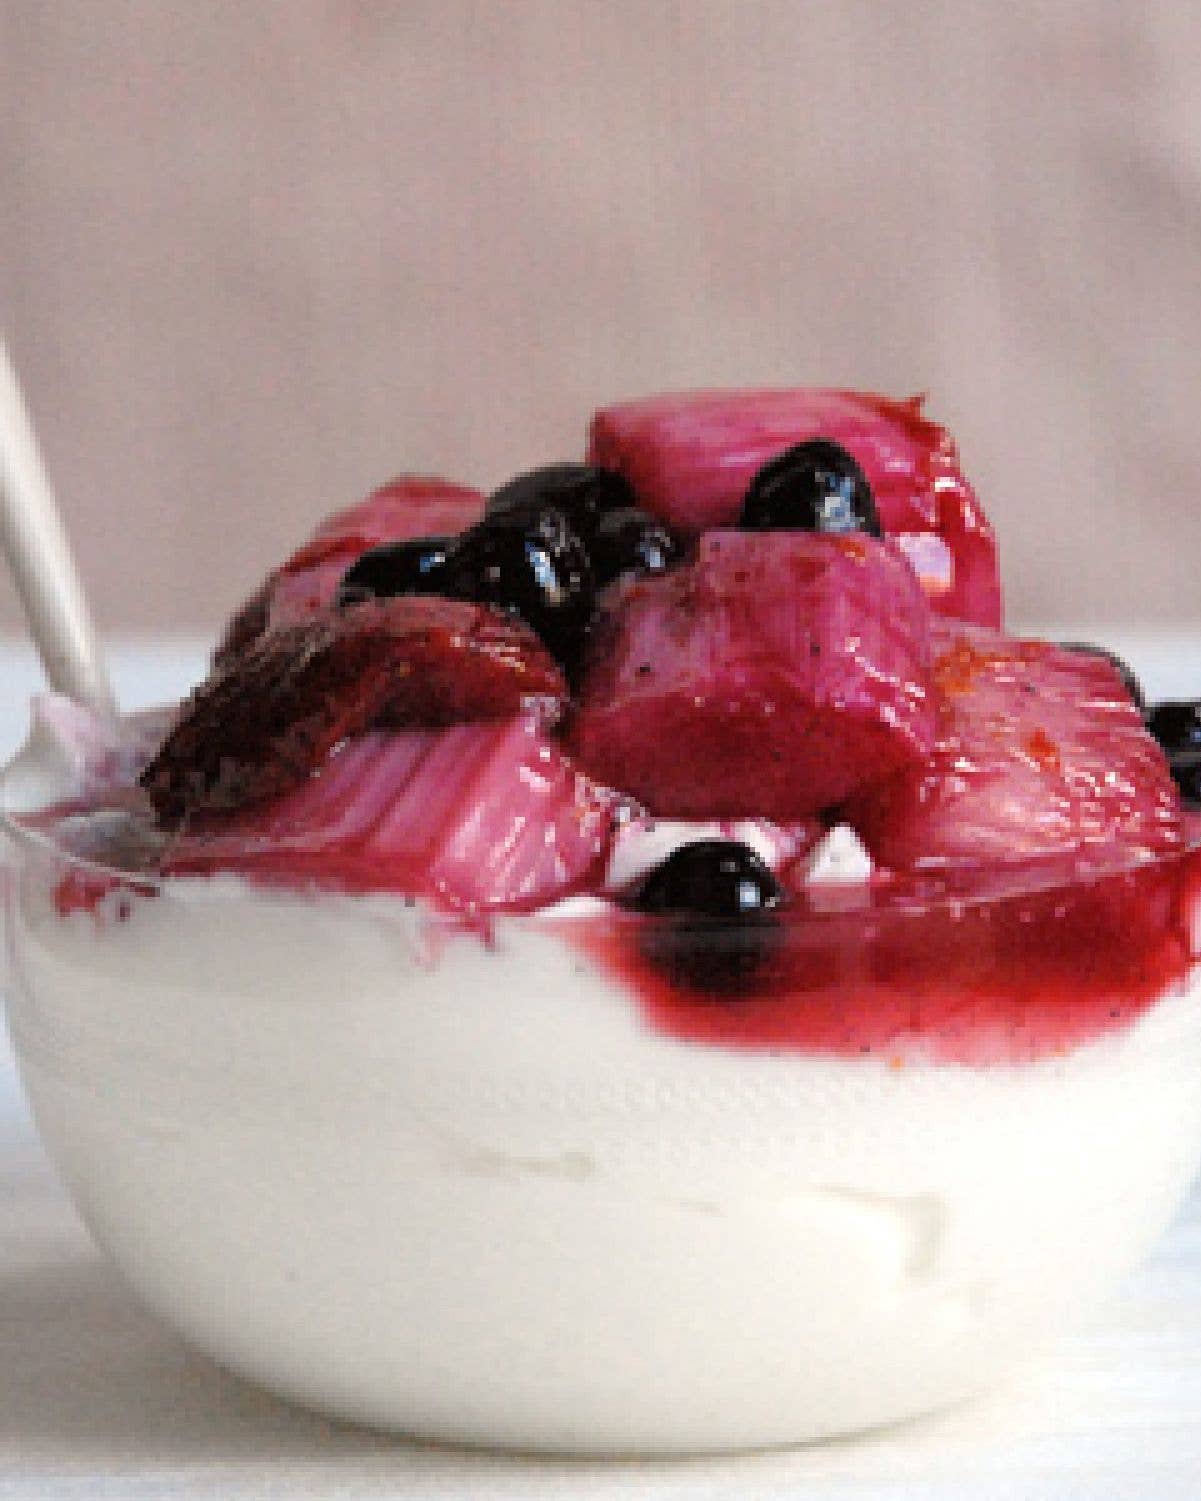 Rhubarb and Berry Compote